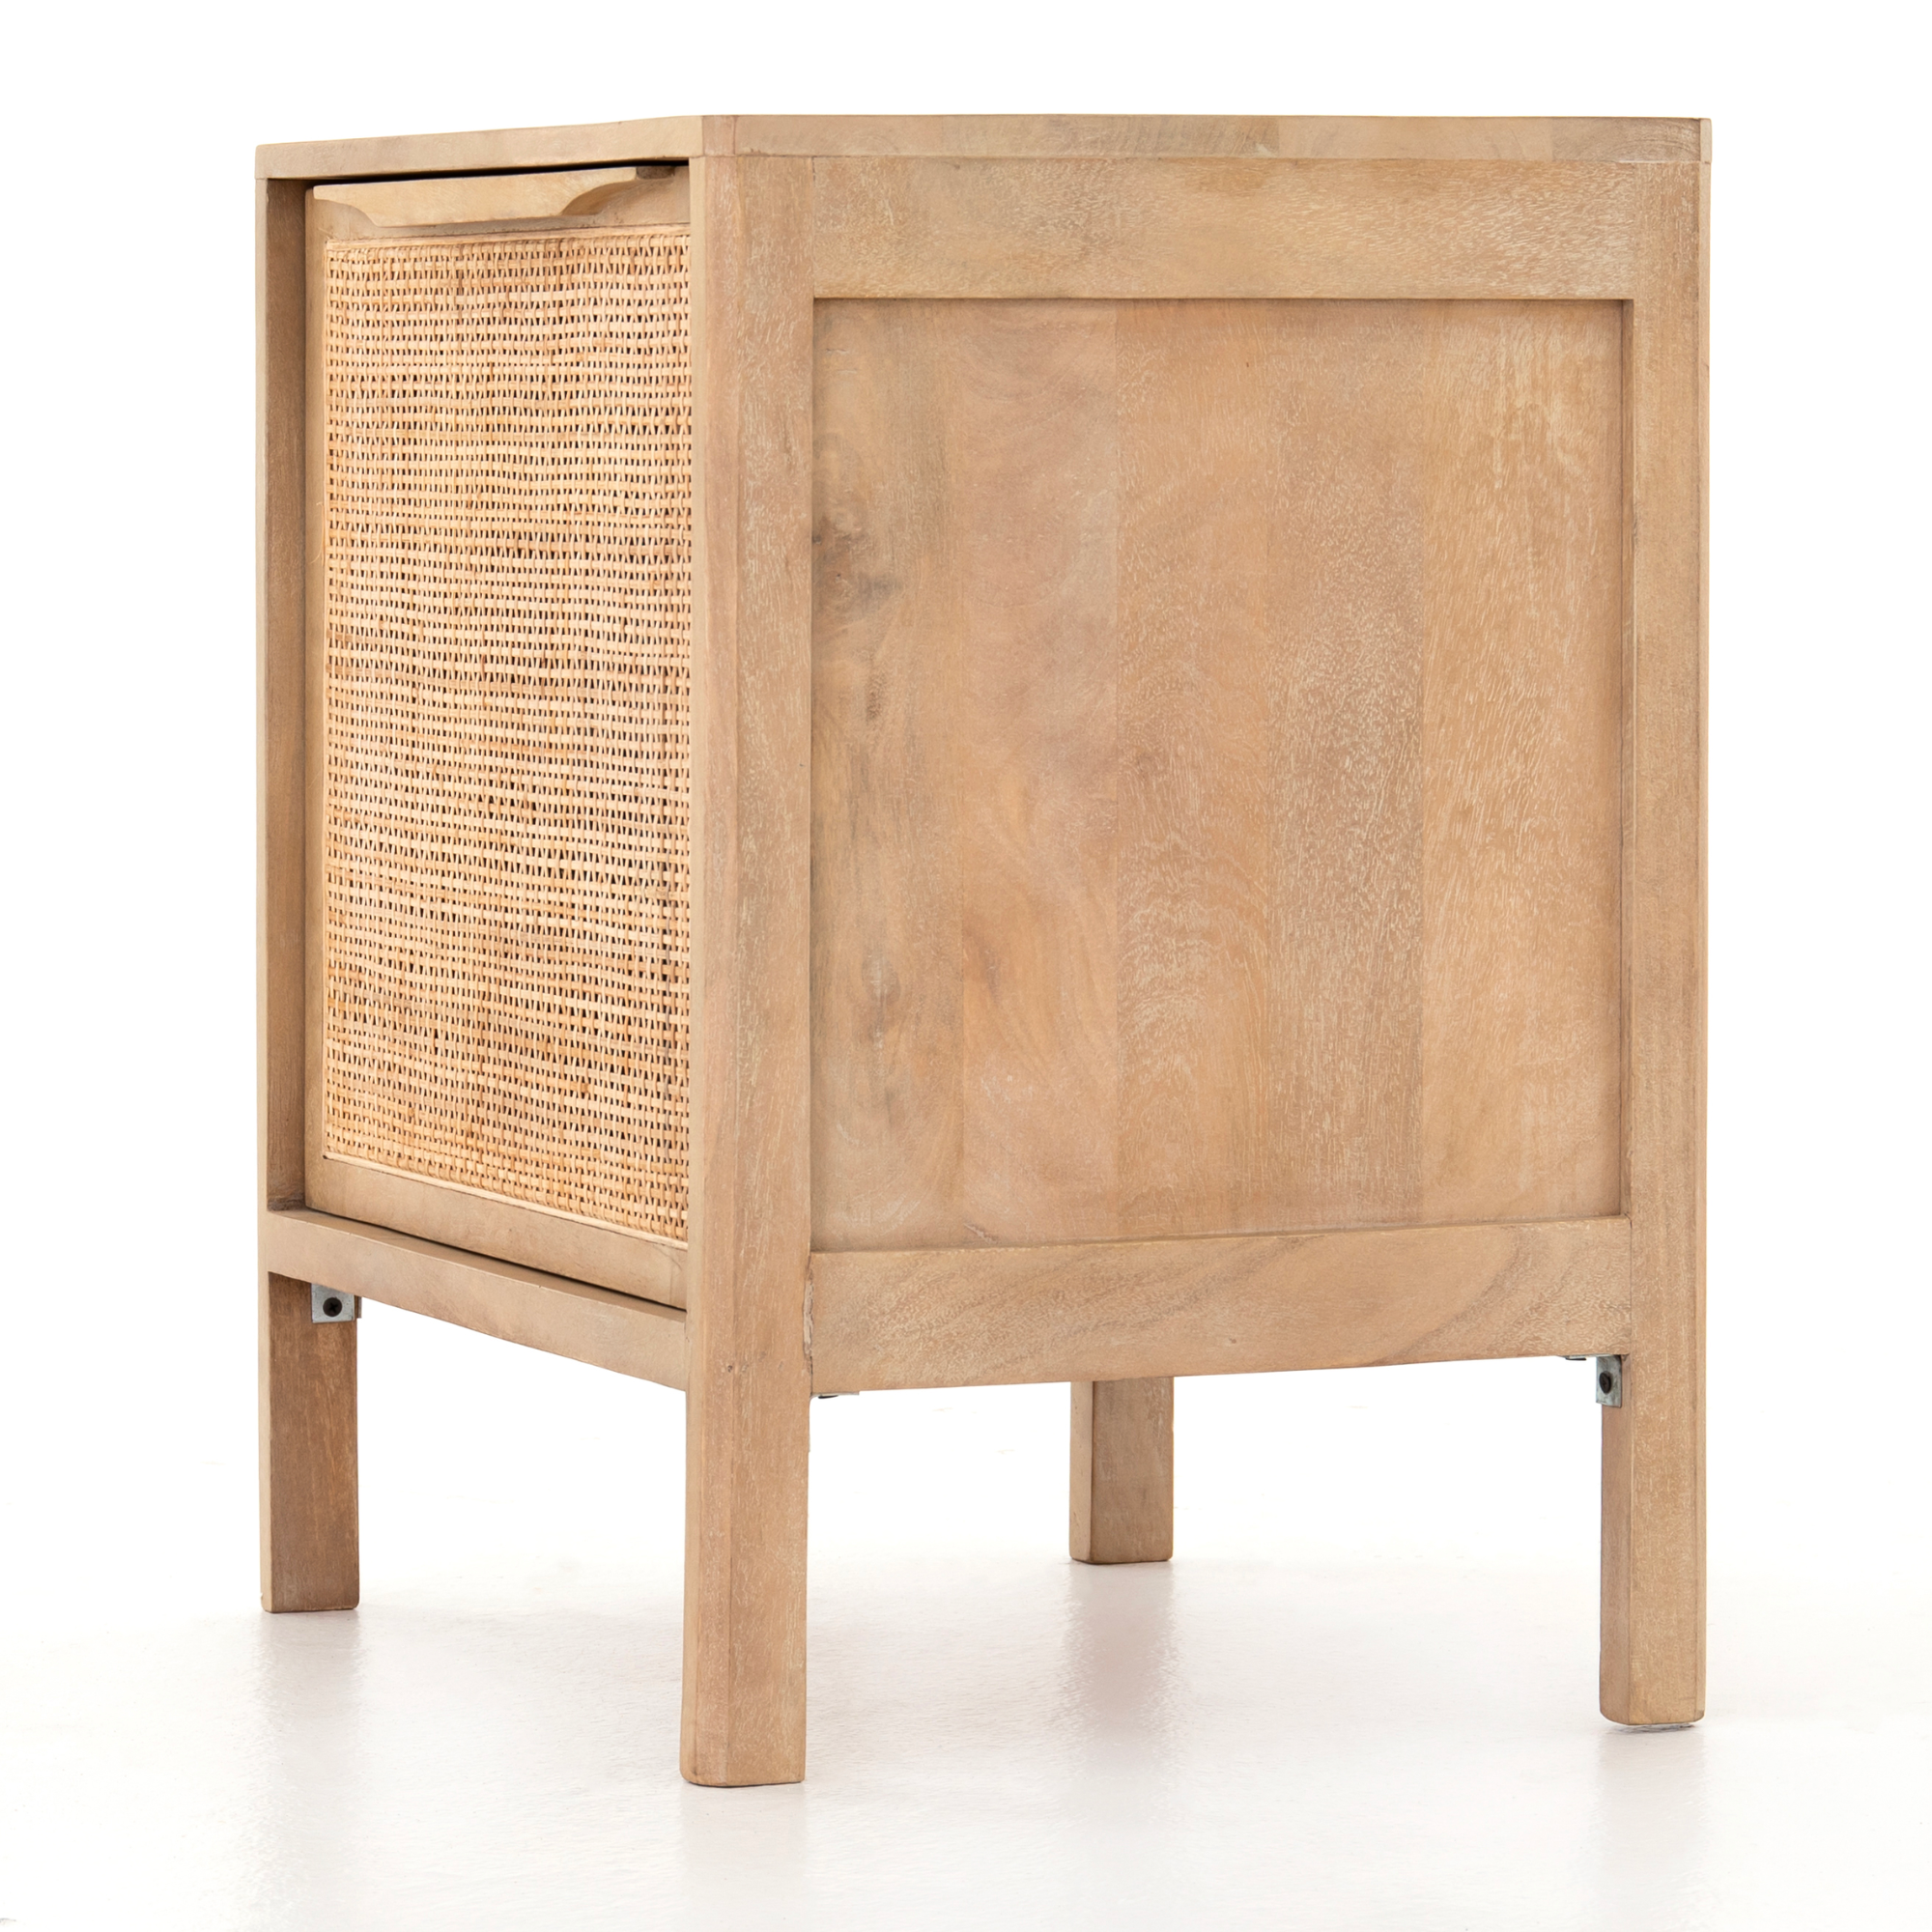 Sybil Nightstand - Natural